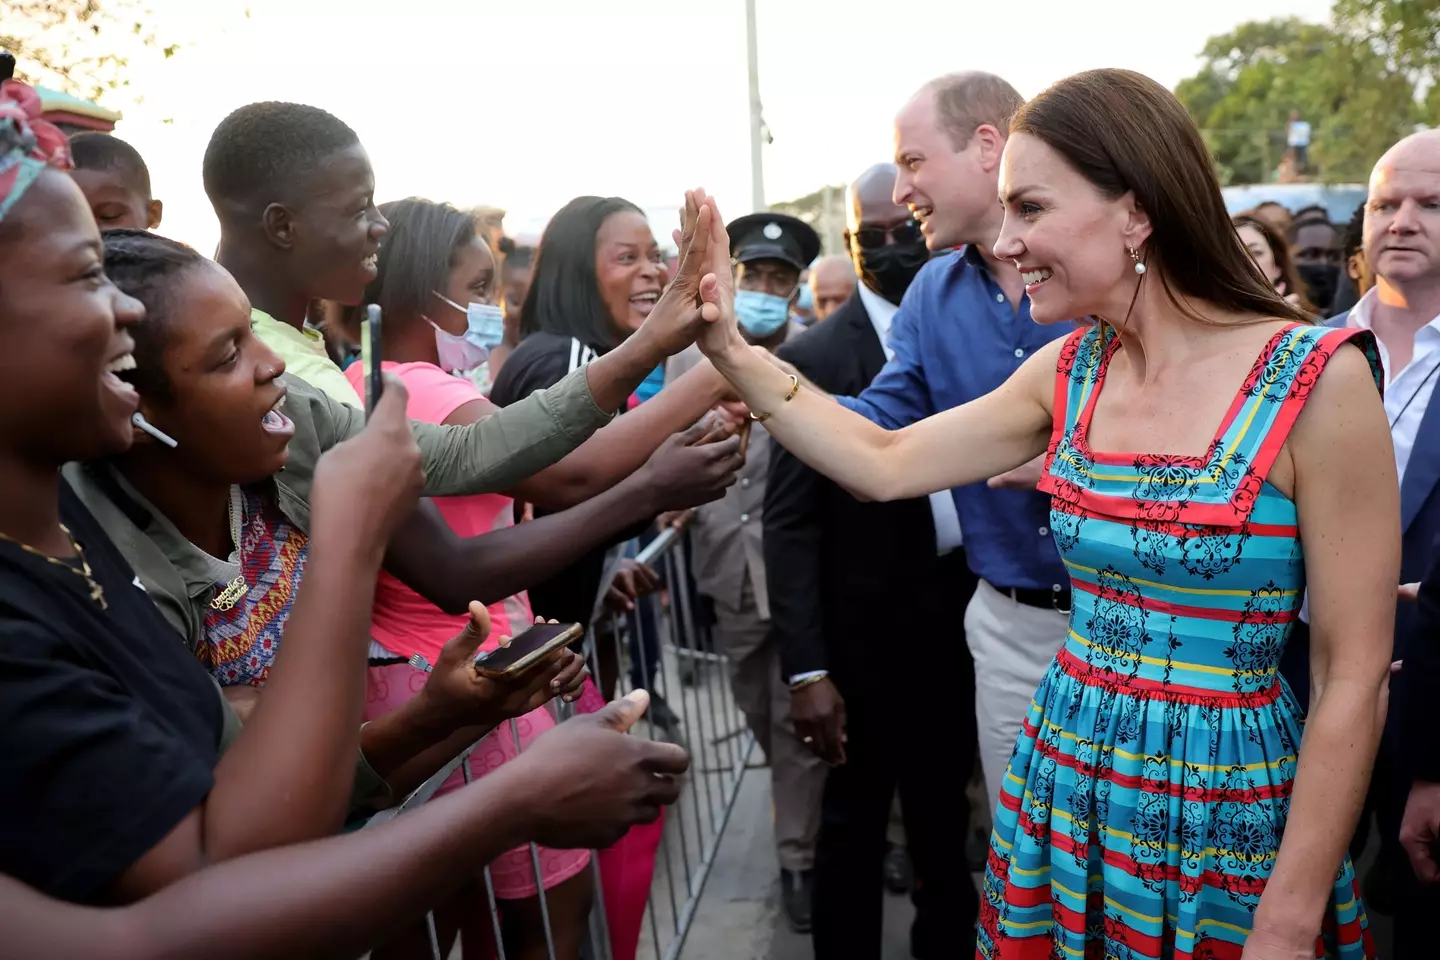 The Duke and Duchess of Cambridge greet locals in Trench Town while on their week-long tour in celebration of the Queen's Diamond Jubilee.